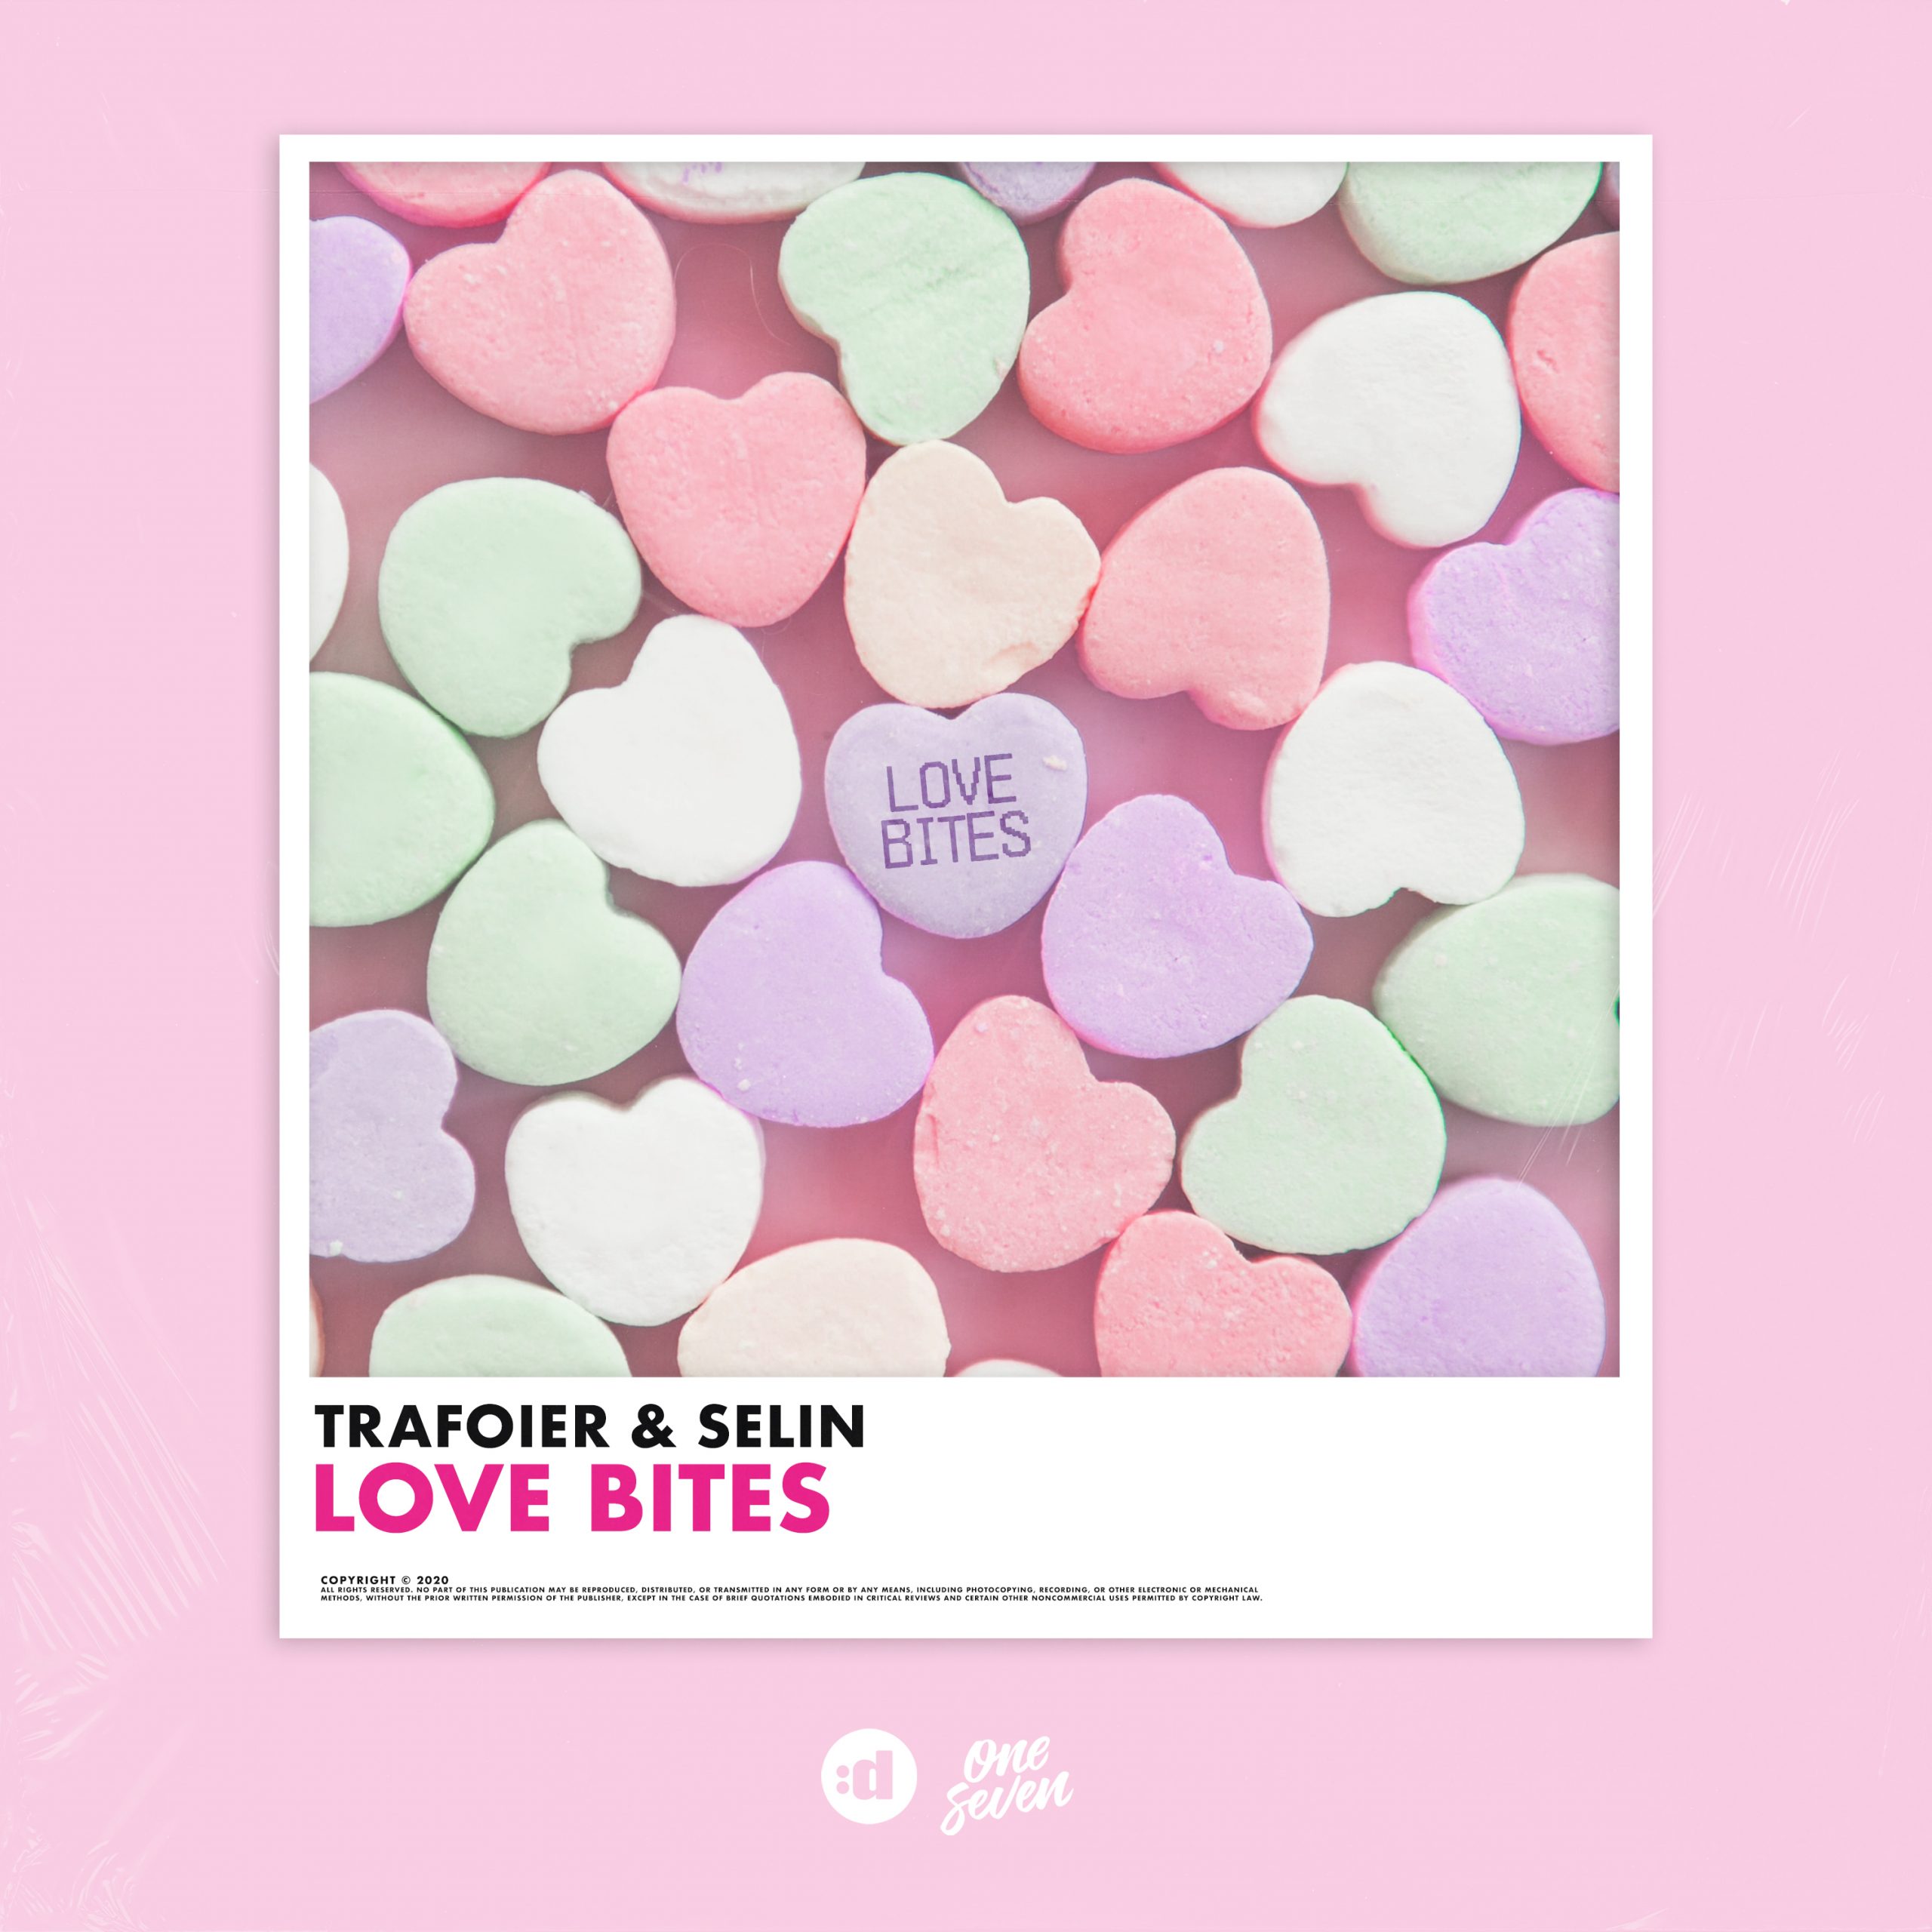 Love Bites is an emotional summer tune. The song was written by Selin Gecit and Ben McConnachie and was produced by Trafoier.